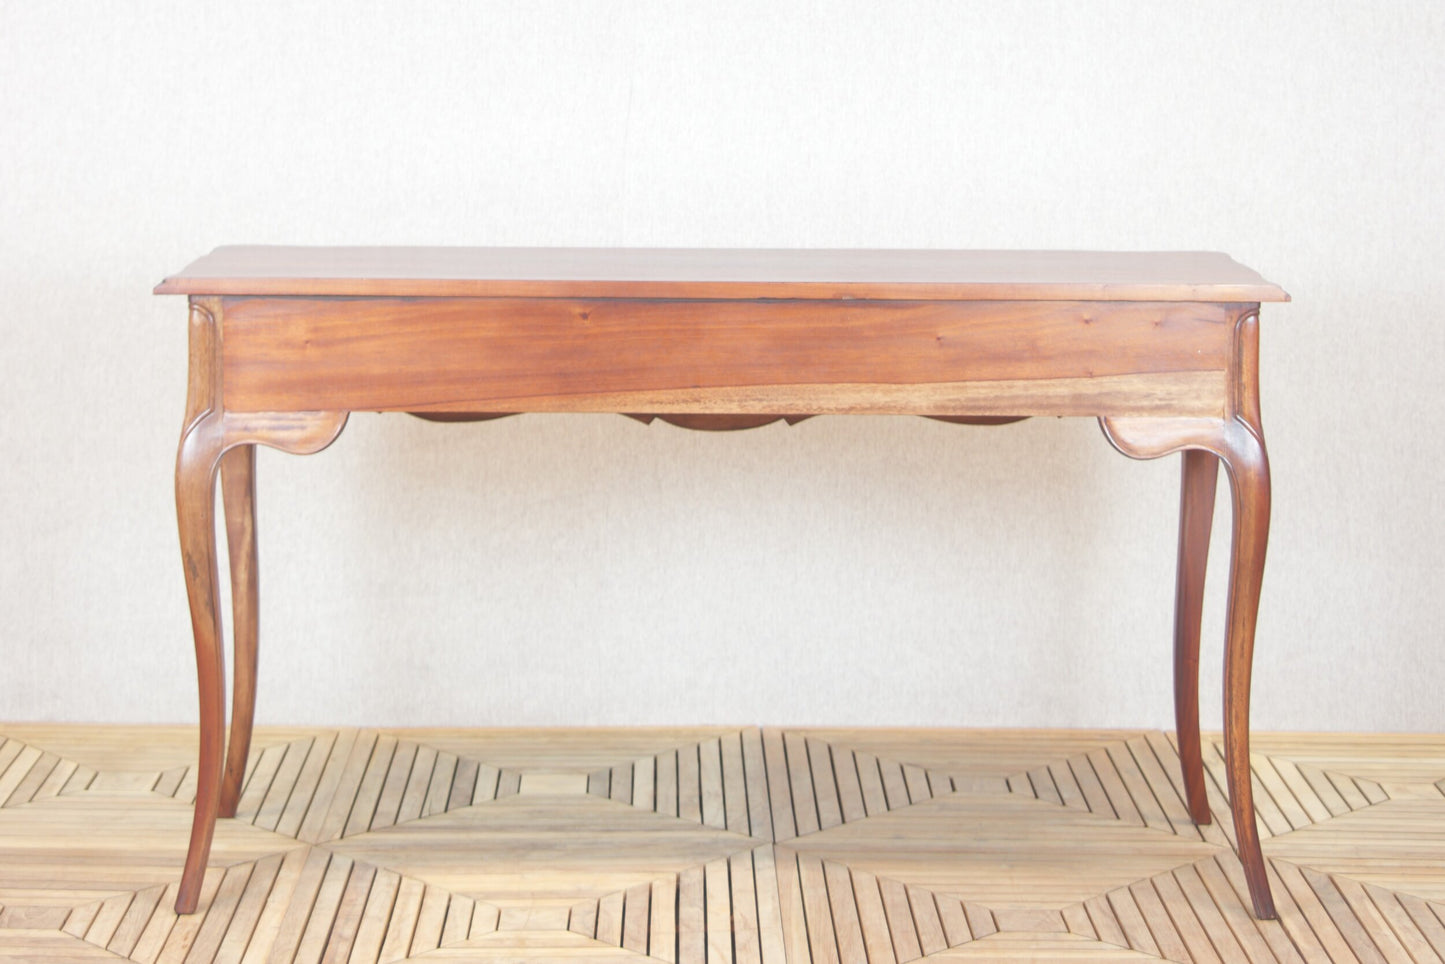 French Provincial 3-Drawer Console Table